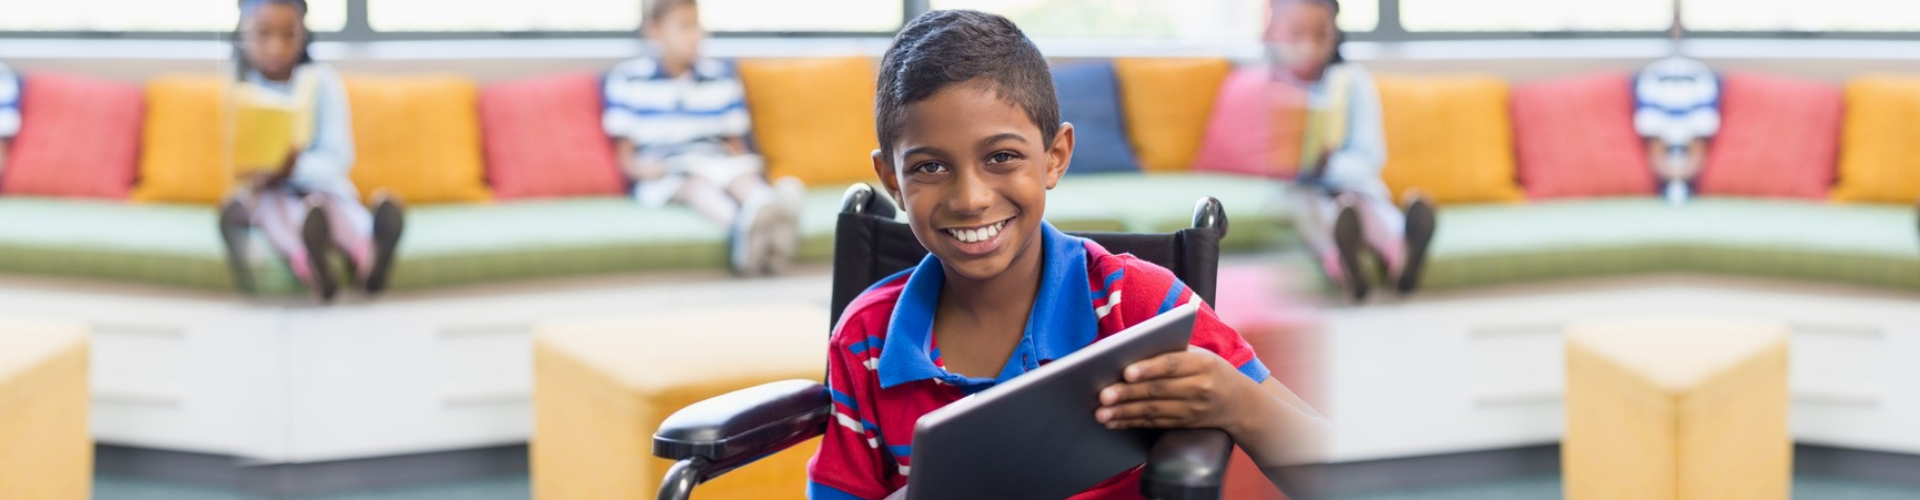 smiling boy on wheelchair using digital tablet in library at school